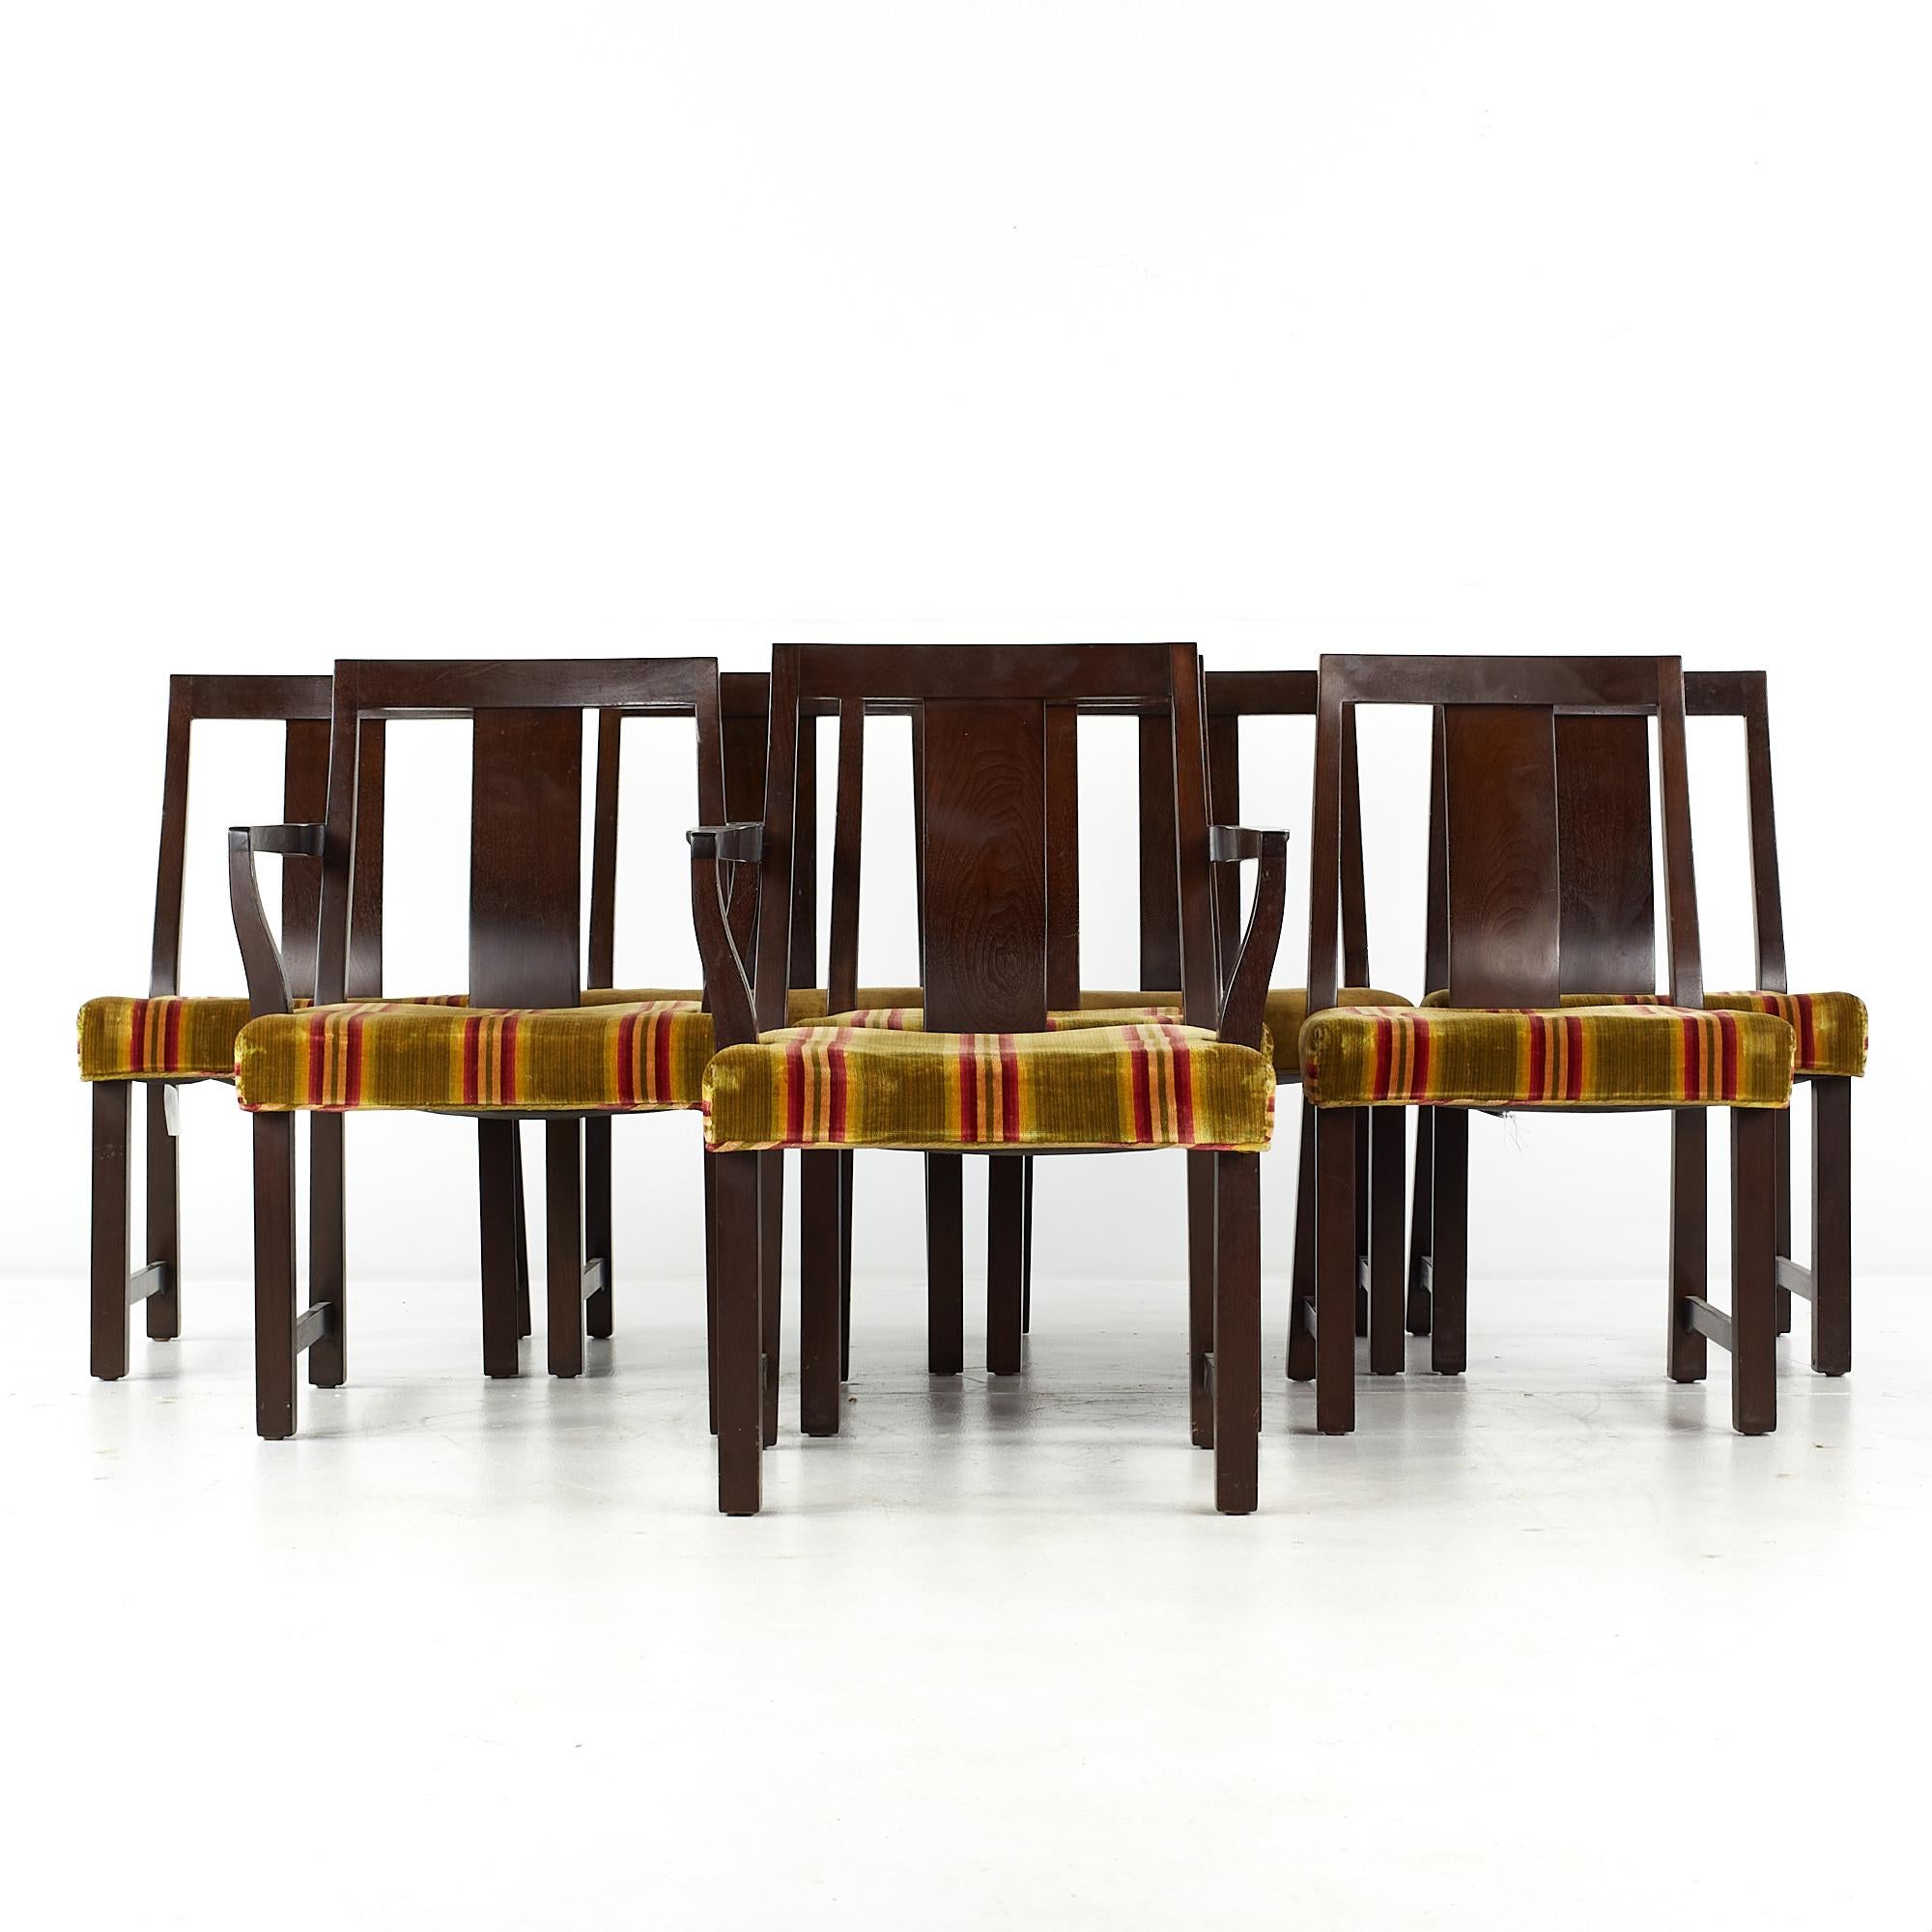 Edward Wormley for Dunbar mid century Mahogany dining chairs - set of 8

Each armless chair measures: 20 wide x 20 deep x 33 high, with a seat height of 17 inches
Each captains chair measures: 23.5 wide x 20 deep x 33 high, with a seat height of